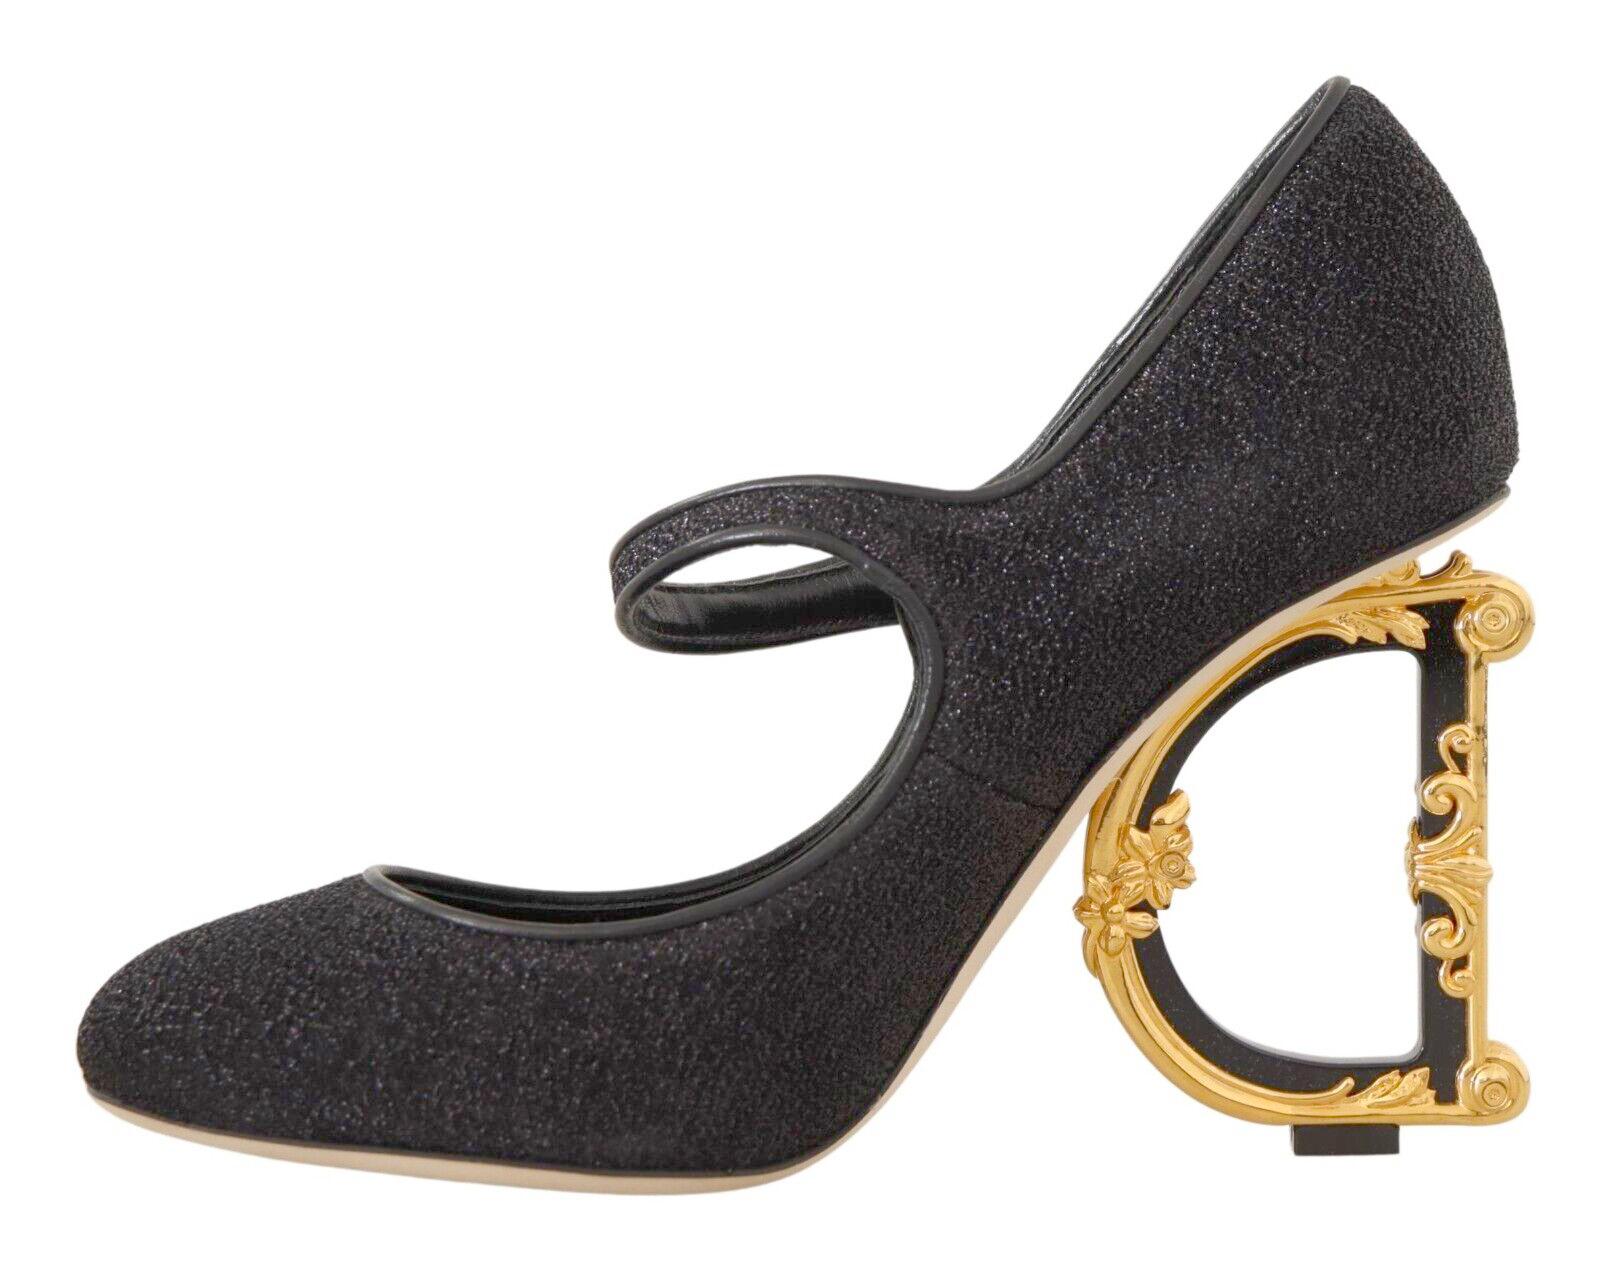 DOLCE & GABBANA

Gorgeous brand new with tags, 100% Authentic Dolce & Gabbana devotion mary jane pumps with DG logo heels.

Model: Heels pumps


Color: Black
Material: 43% Cotton 47% Nylon 10% Leather

Sole: Leather

Logo details

Very high quality